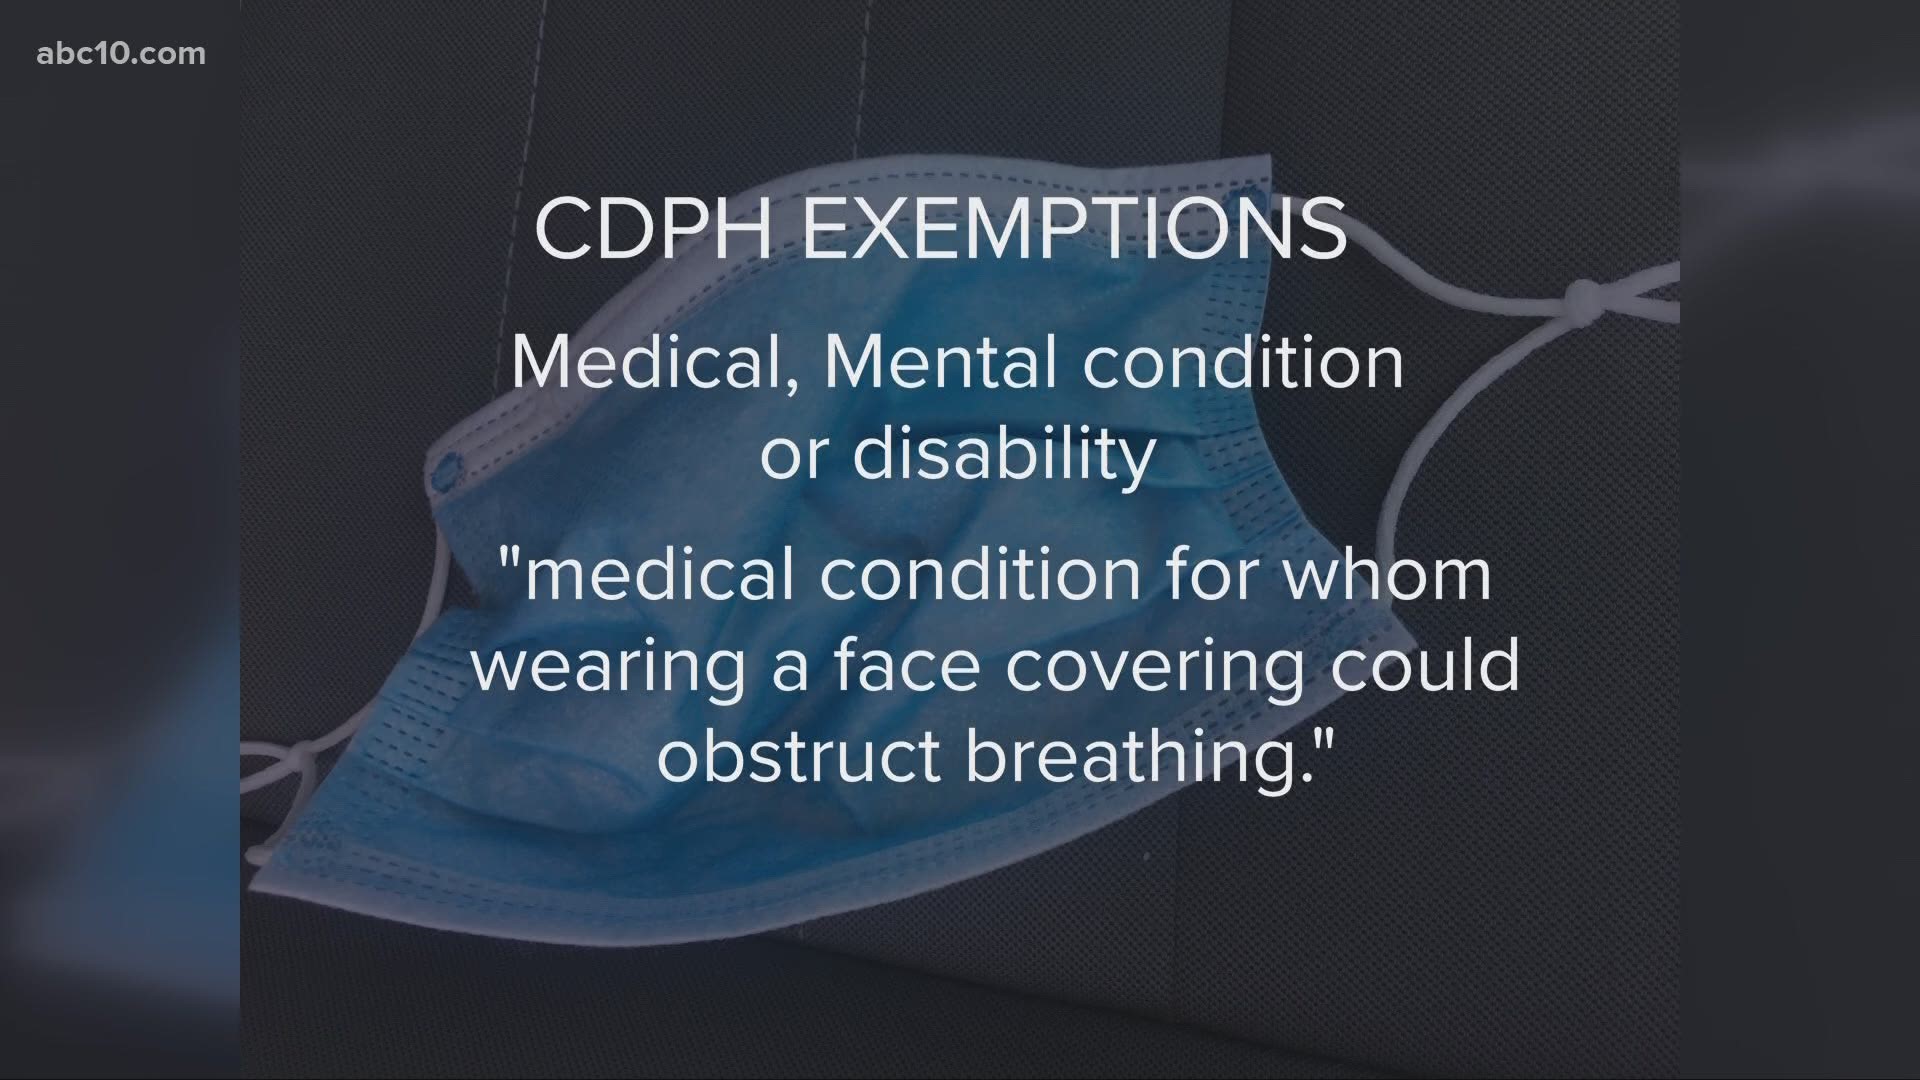 Some medical conditions and hearing-impaired are among the exemptions in California. The state requires people to wear masks in public.